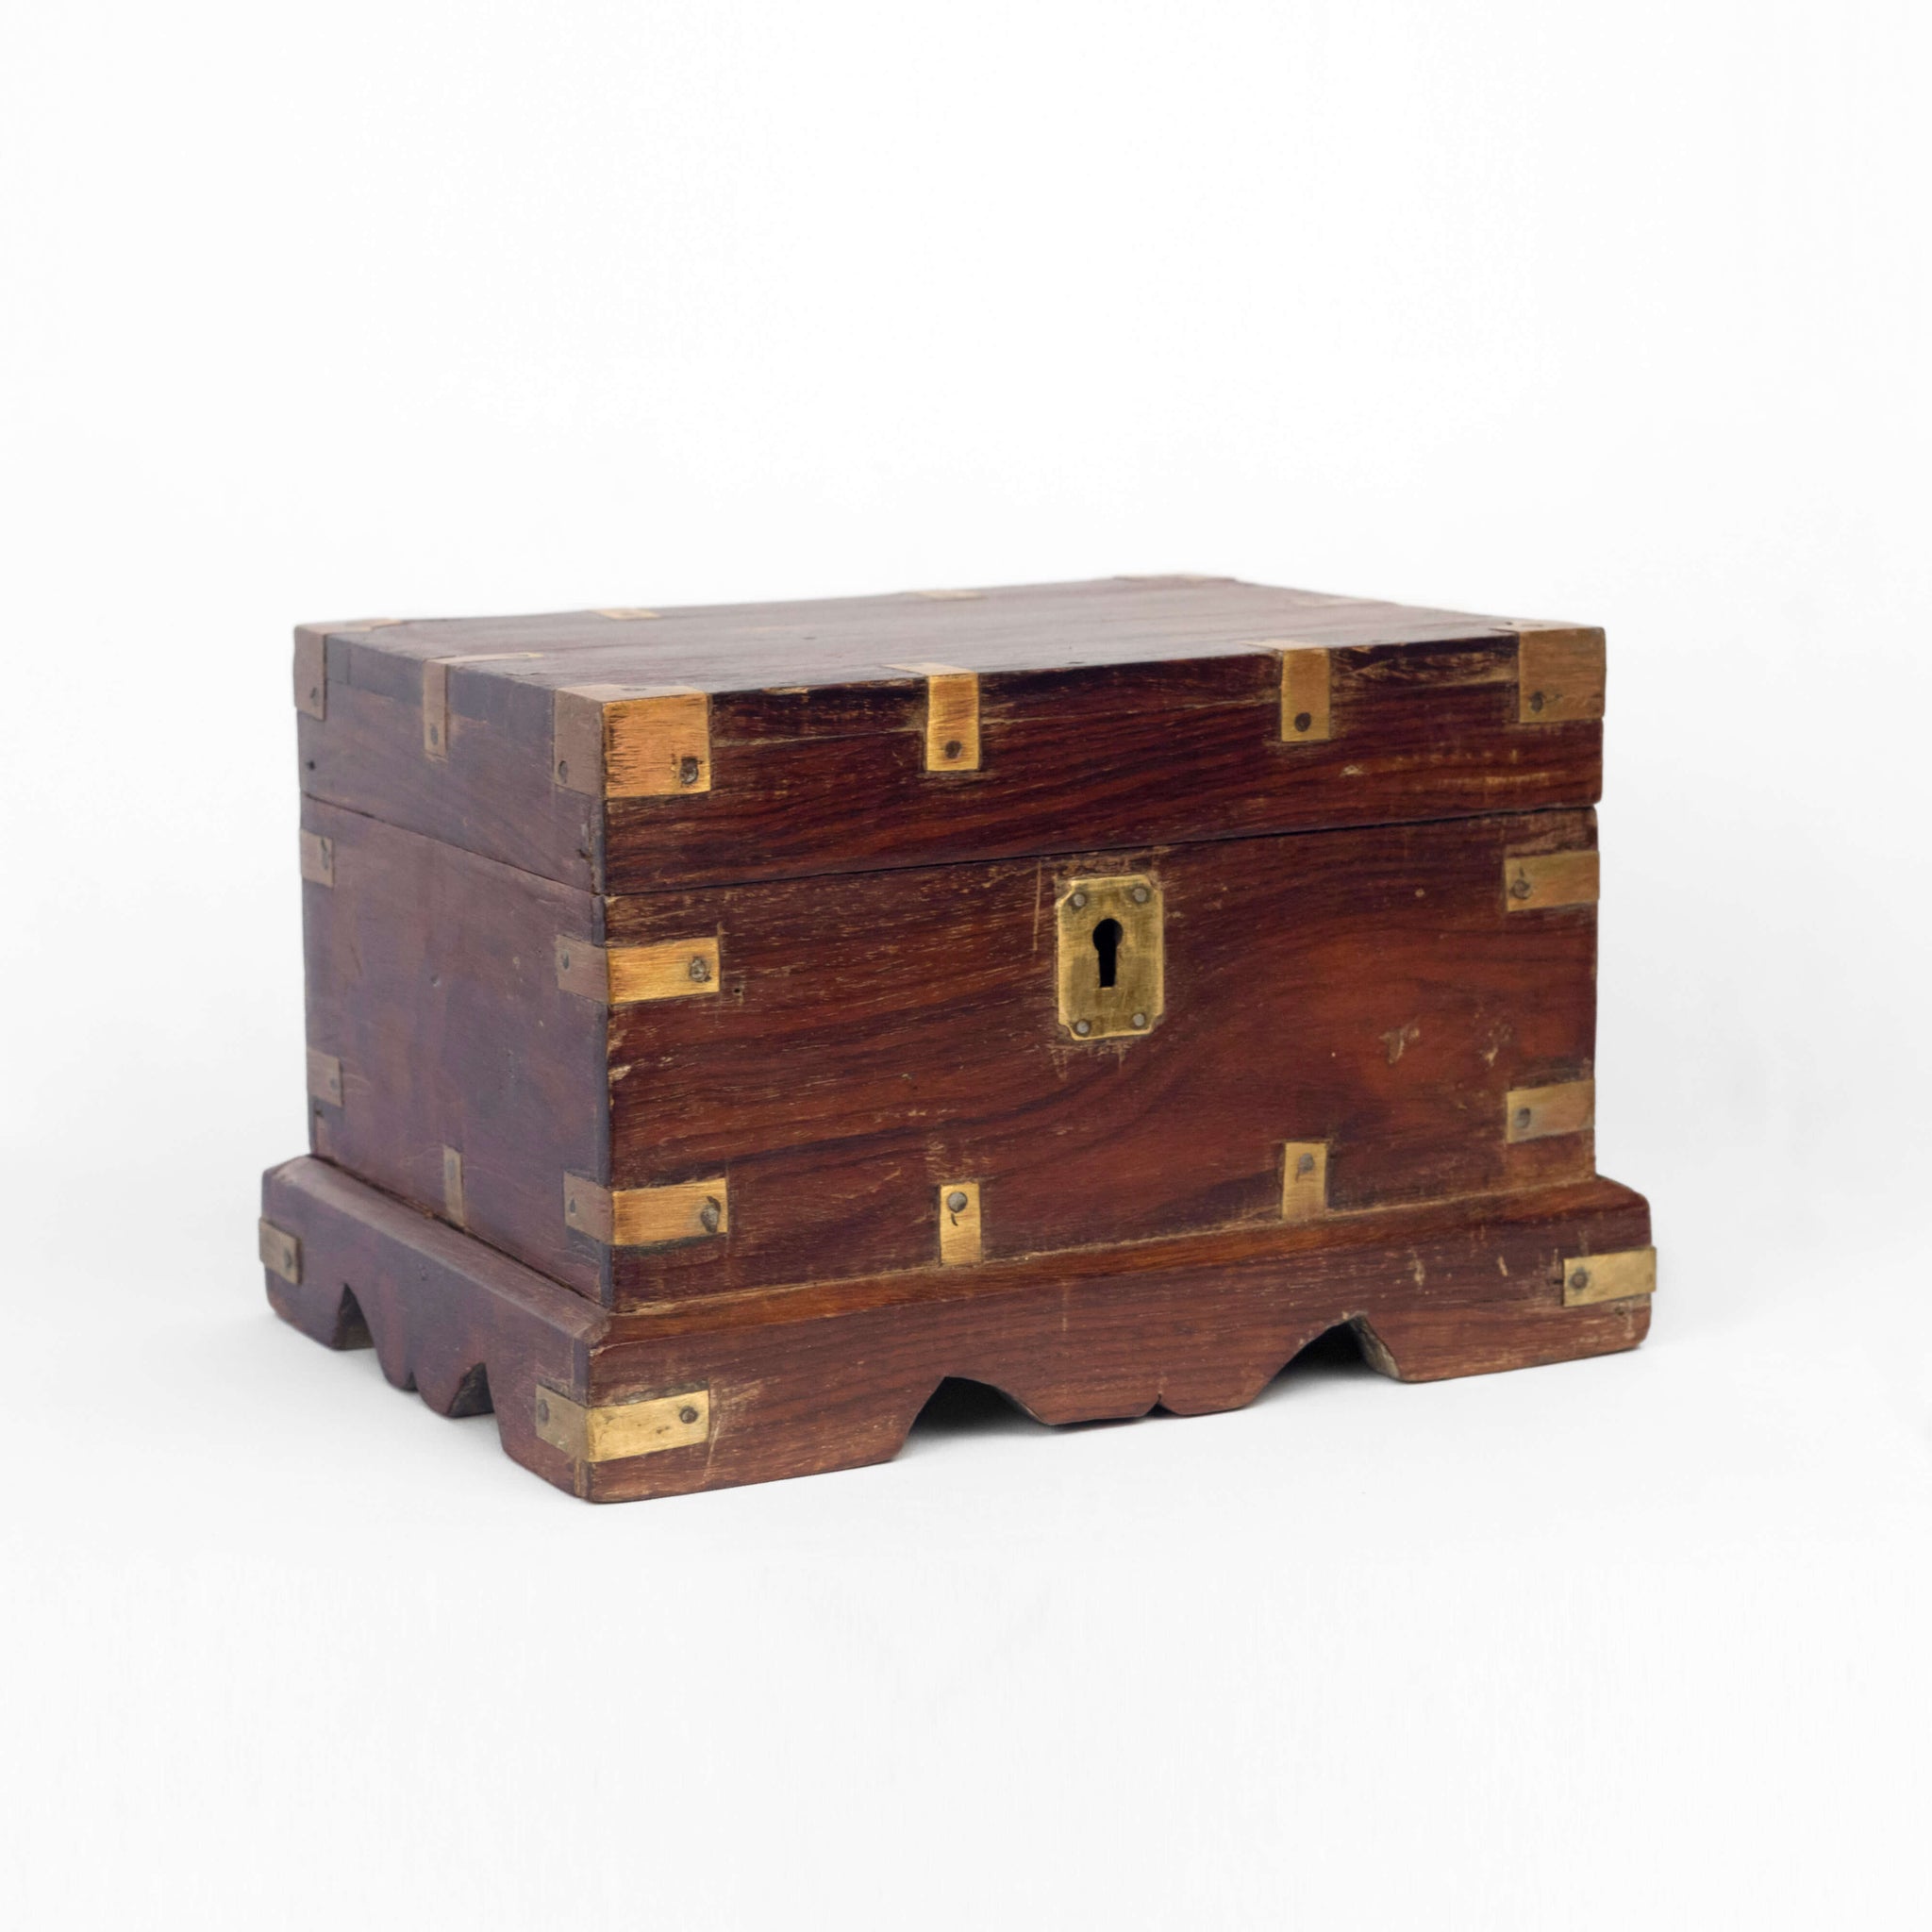 WOODEN CASH BOX WITH BRASS FITTINGS